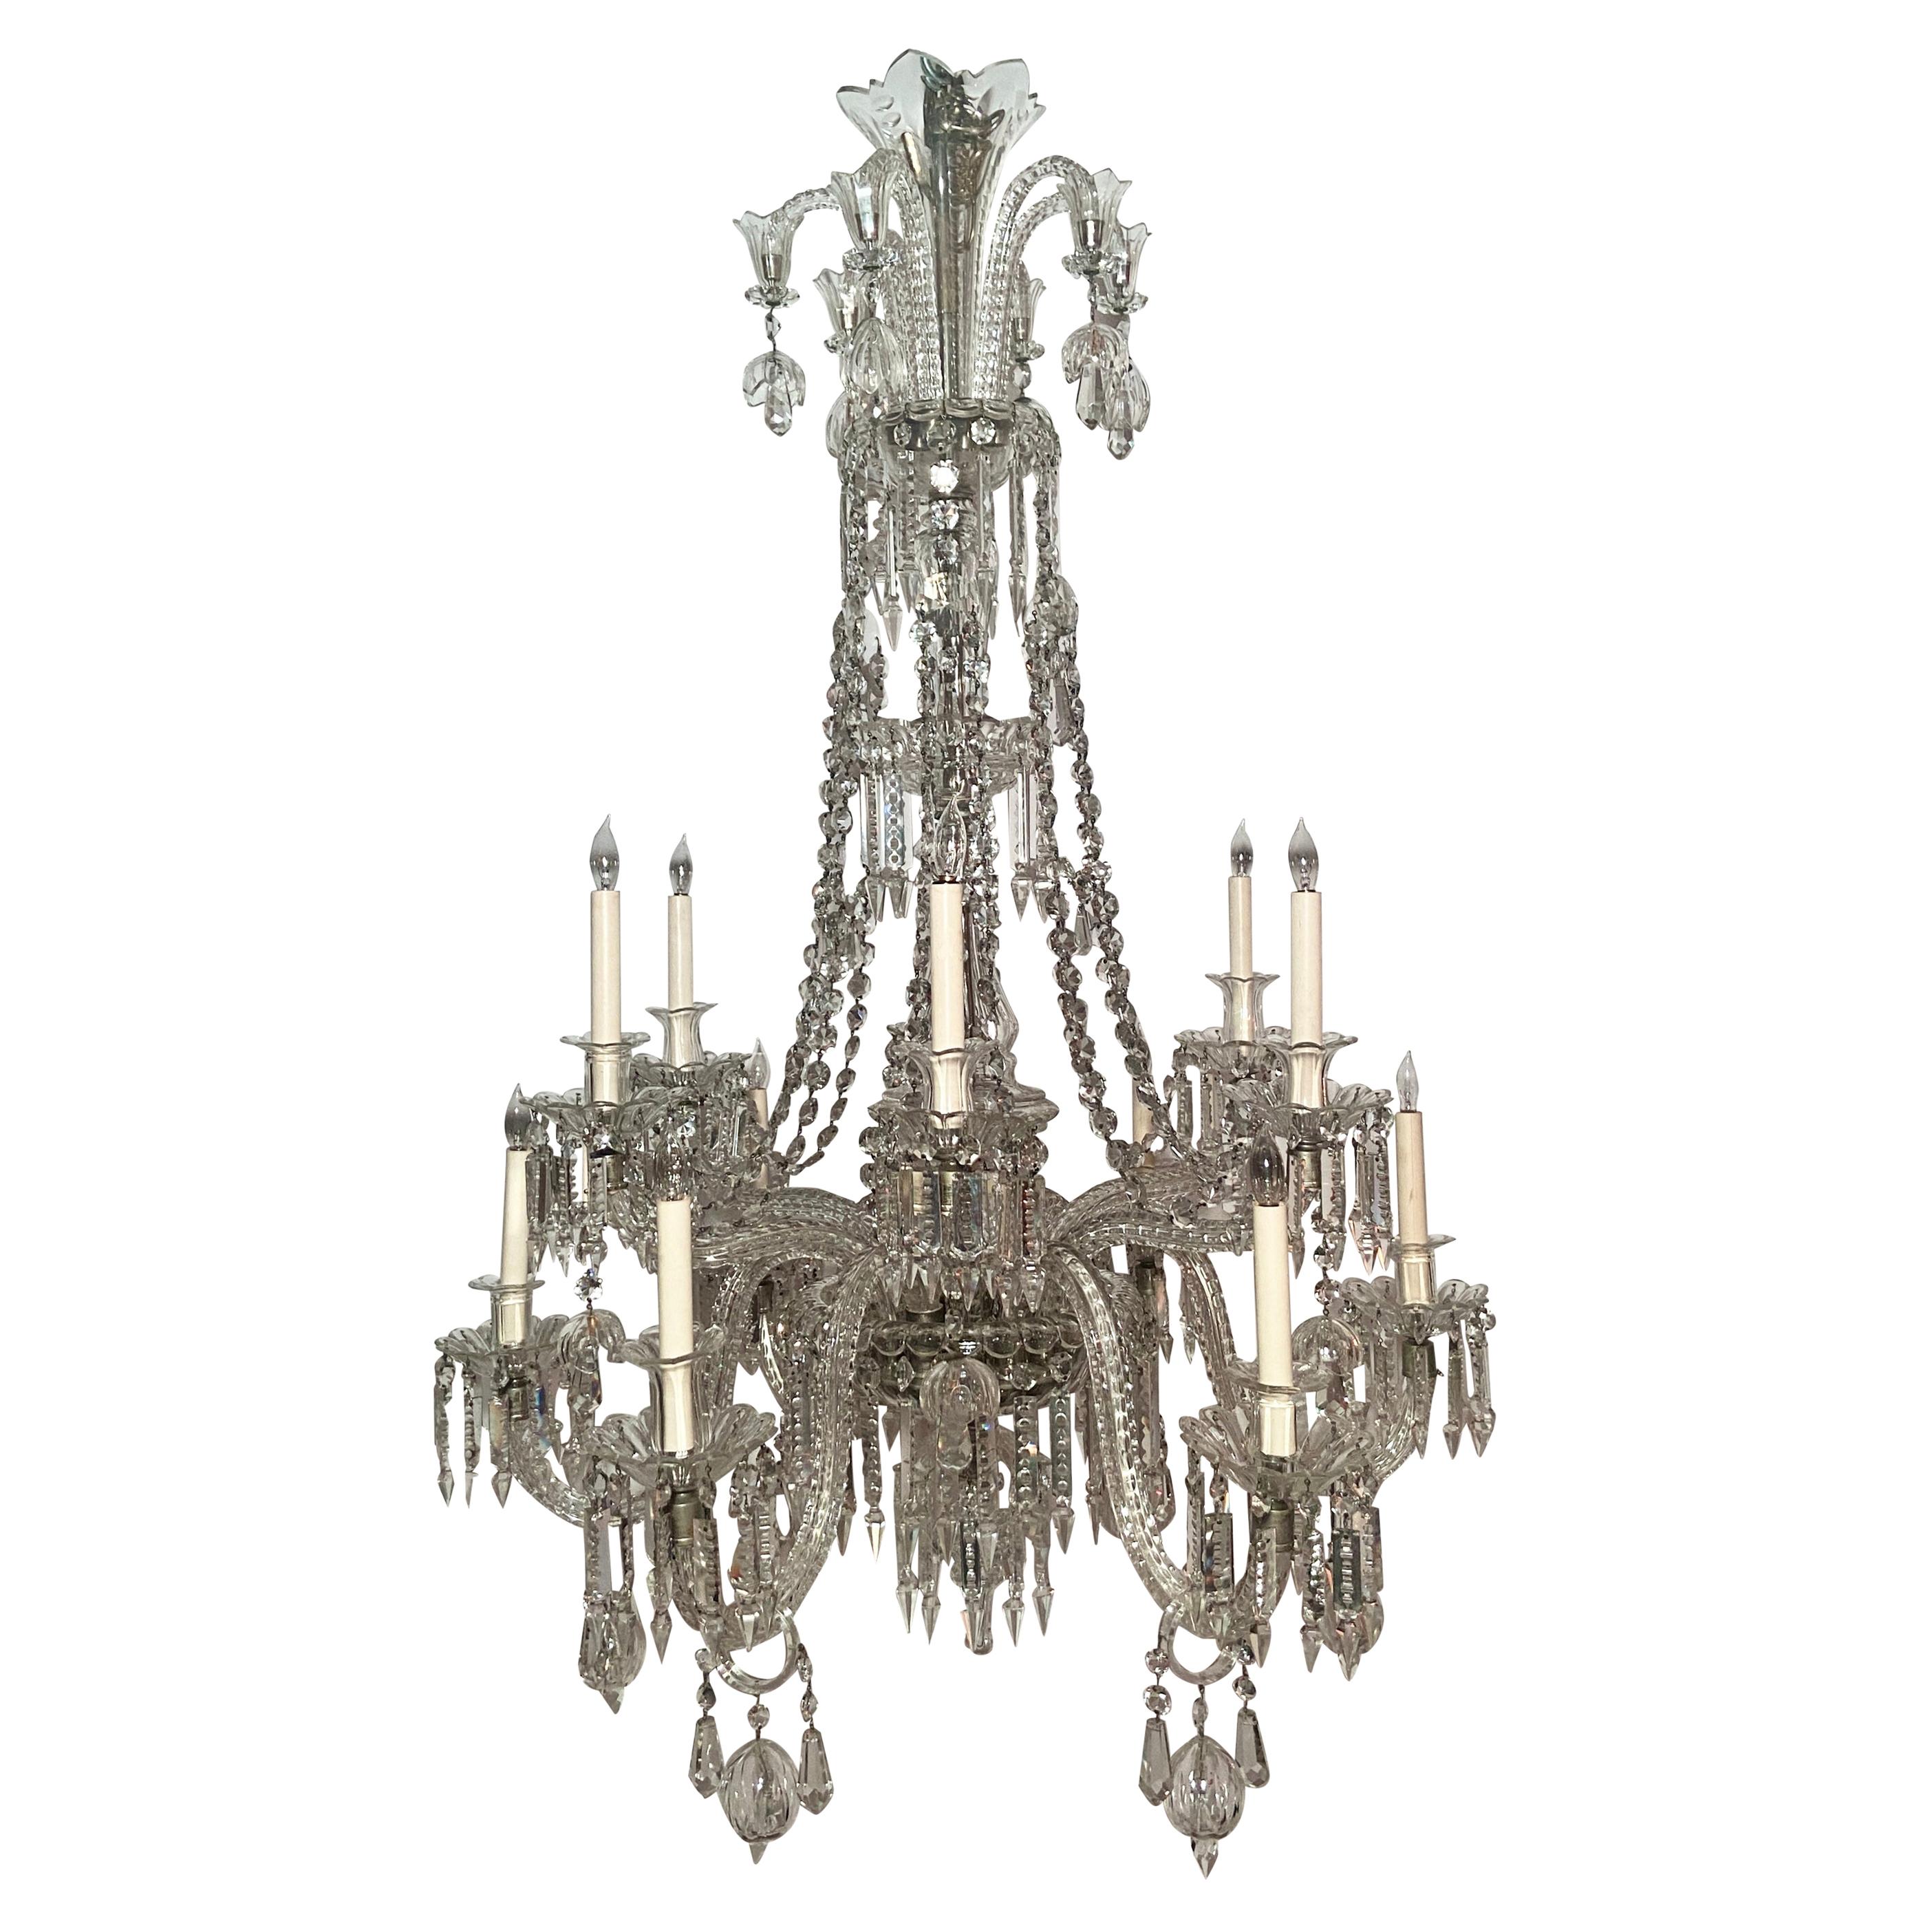 Magnificent Antique 19th Century All Lead Cut Crystal Chandelier. For Sale